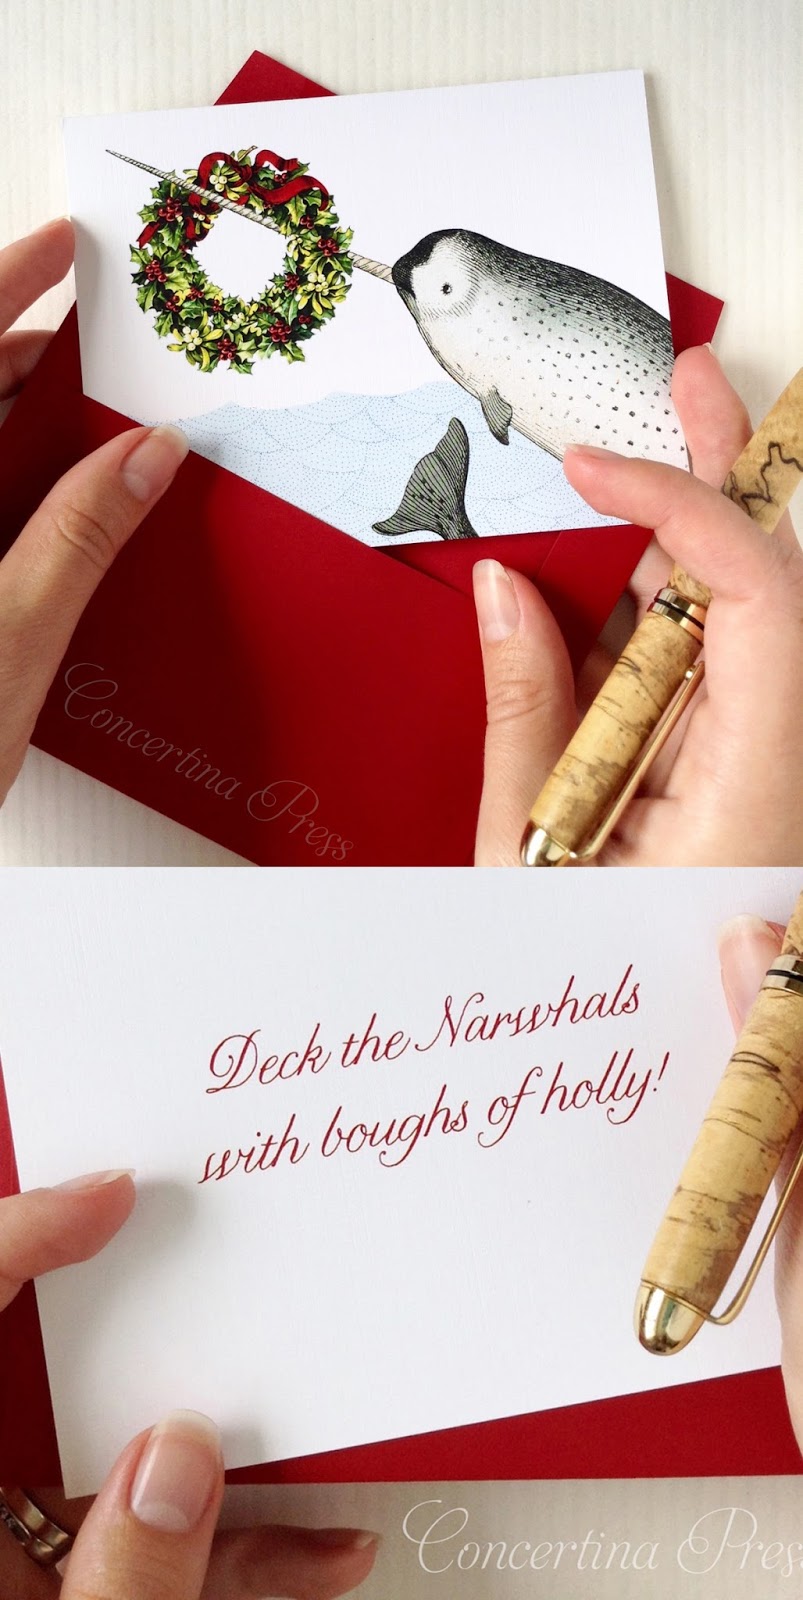 Funny Narwhal Christmas Cards from Concertina Press